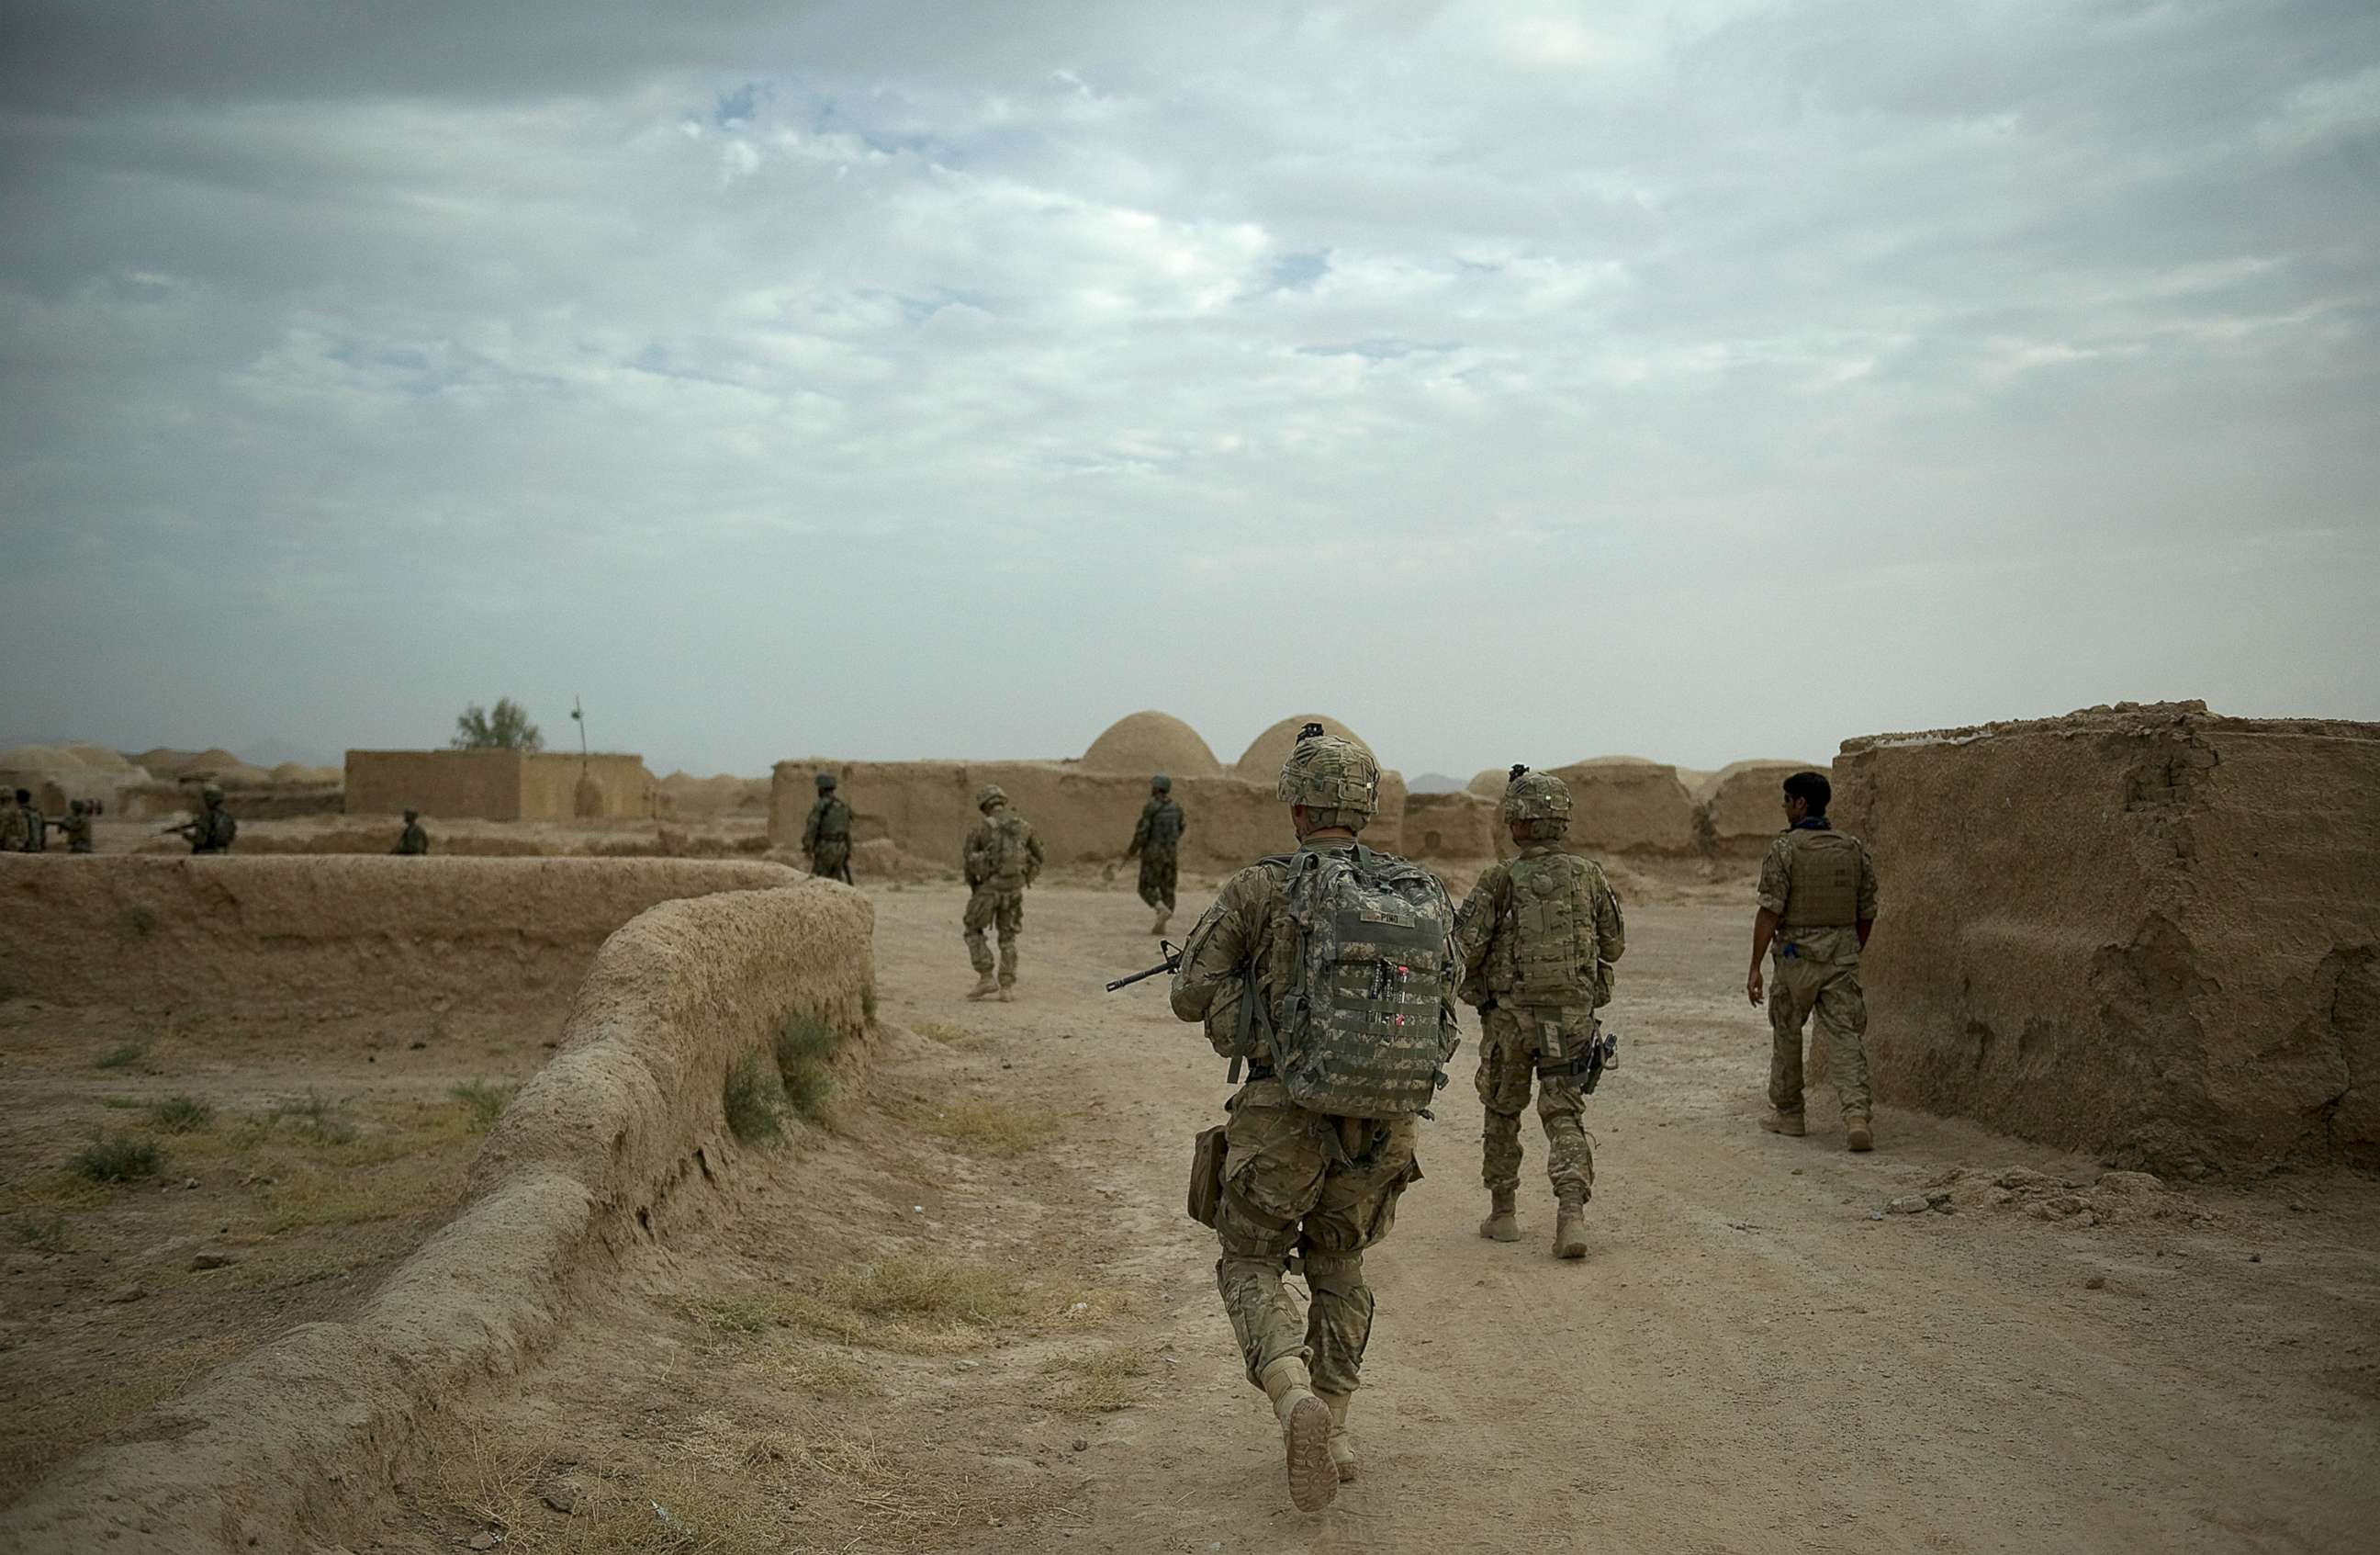 PHOTO: A joint patrol between soldiers from the 1st Platoon, 1-64 Armored Batallion of the U.S. Army,  operating under NATO command, walks through Morghan-Khecha village in Daman district, Kandahar Province, Afghanistan, Sept. 8, 2012. 